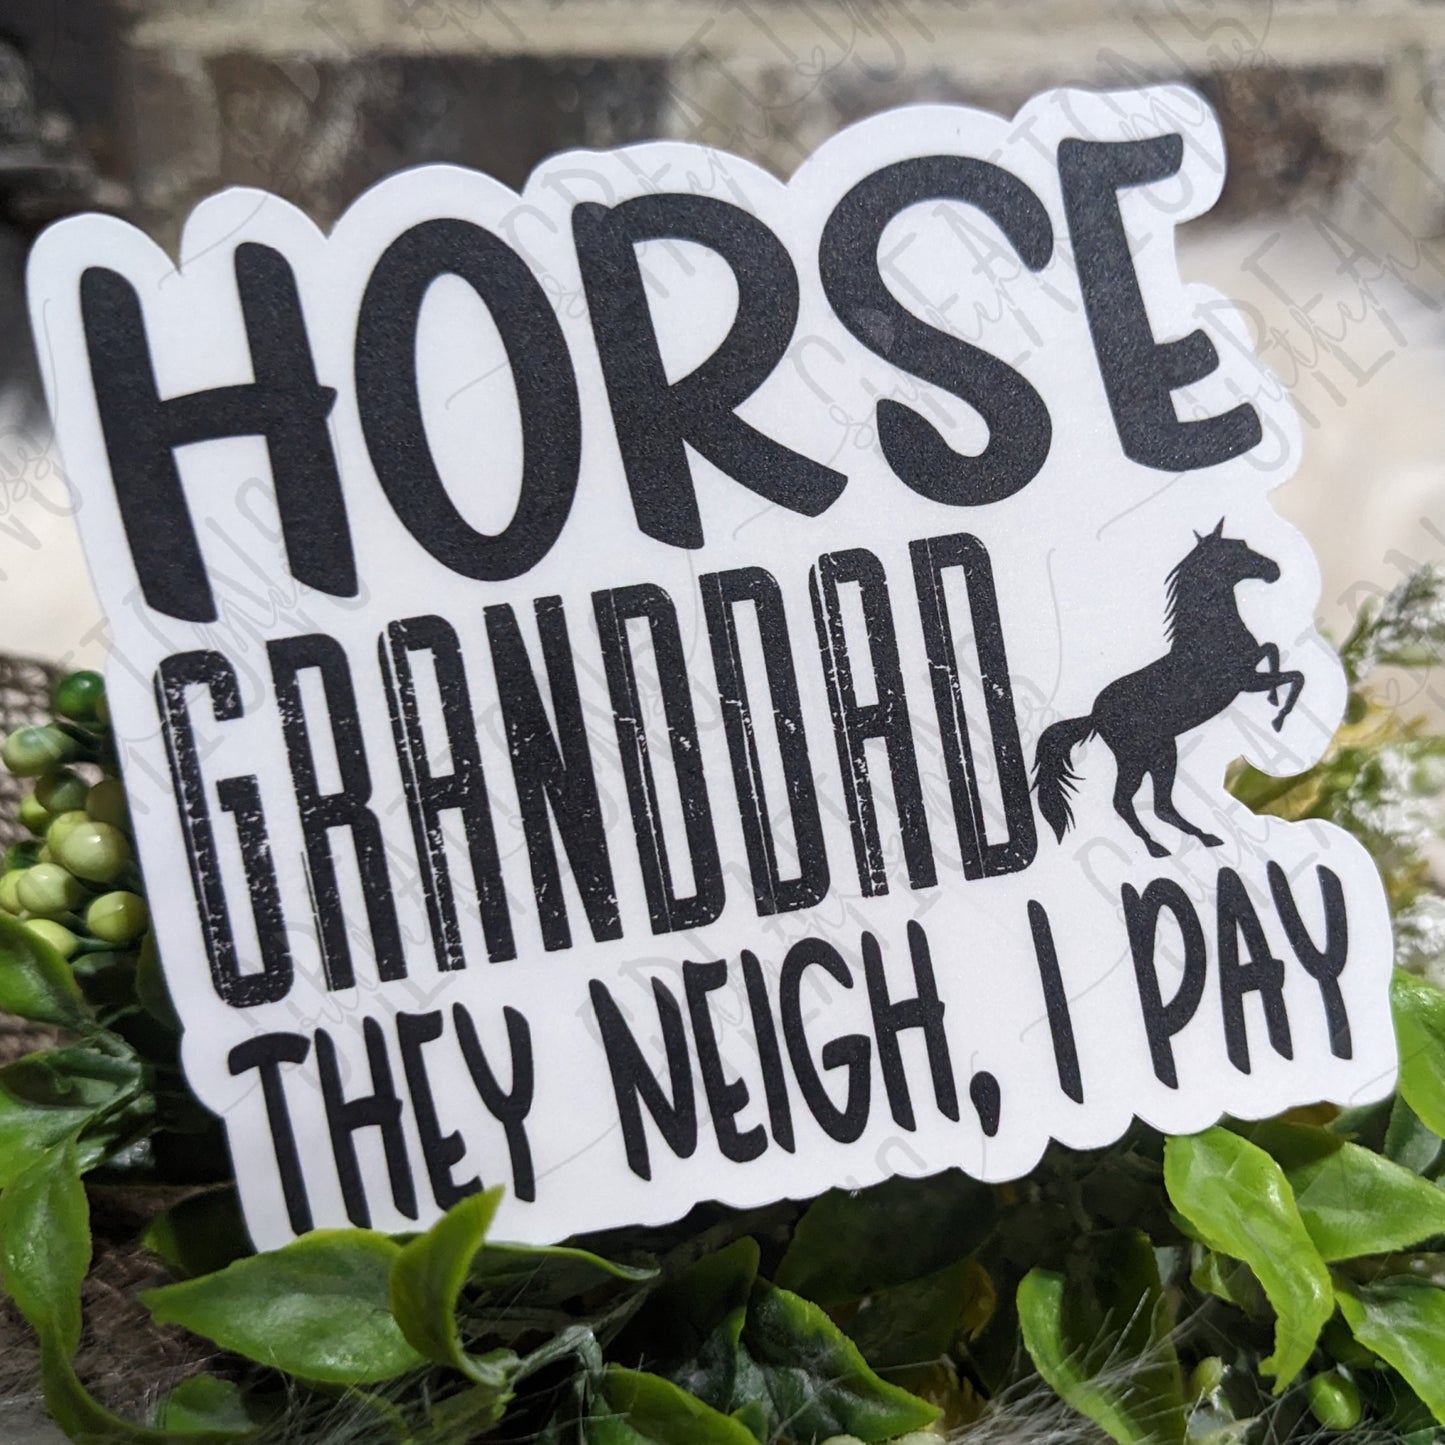 Horse Grandad, They Neigh I Pay